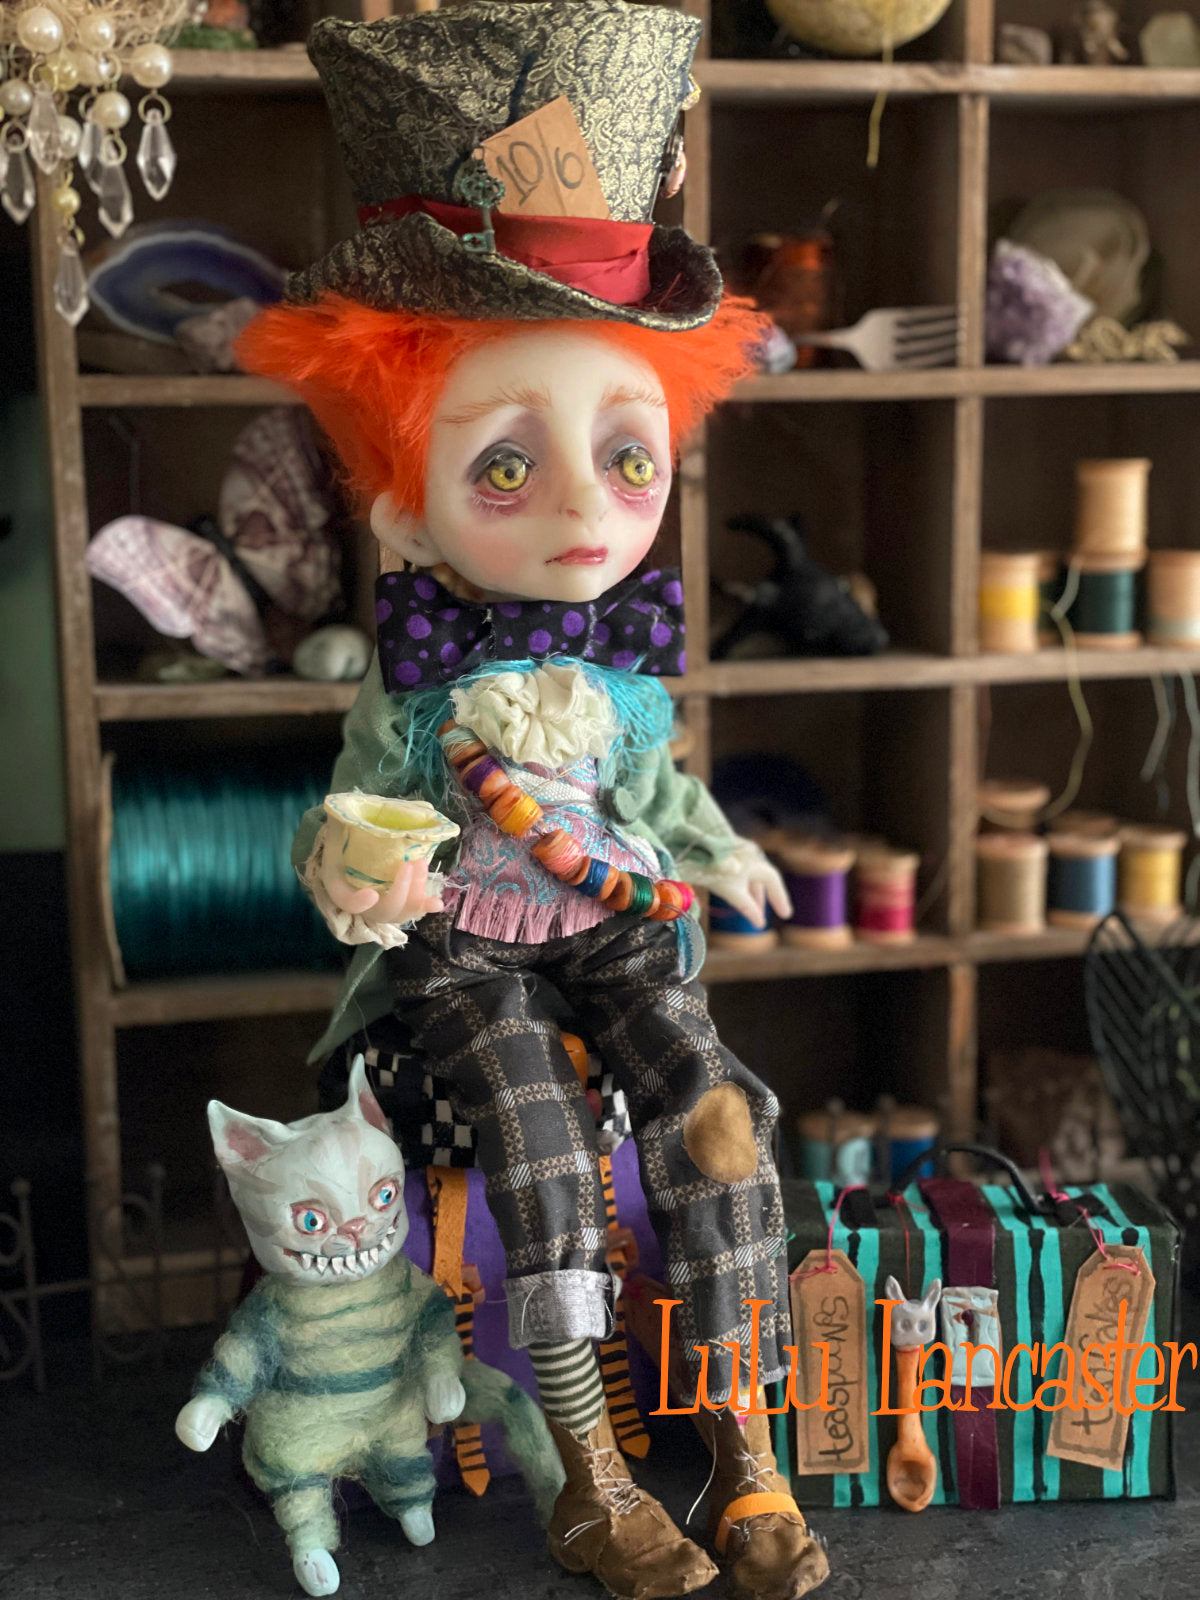 Traveling Mad Hatter and Cheshire Original LuLu Lancaster Art Doll